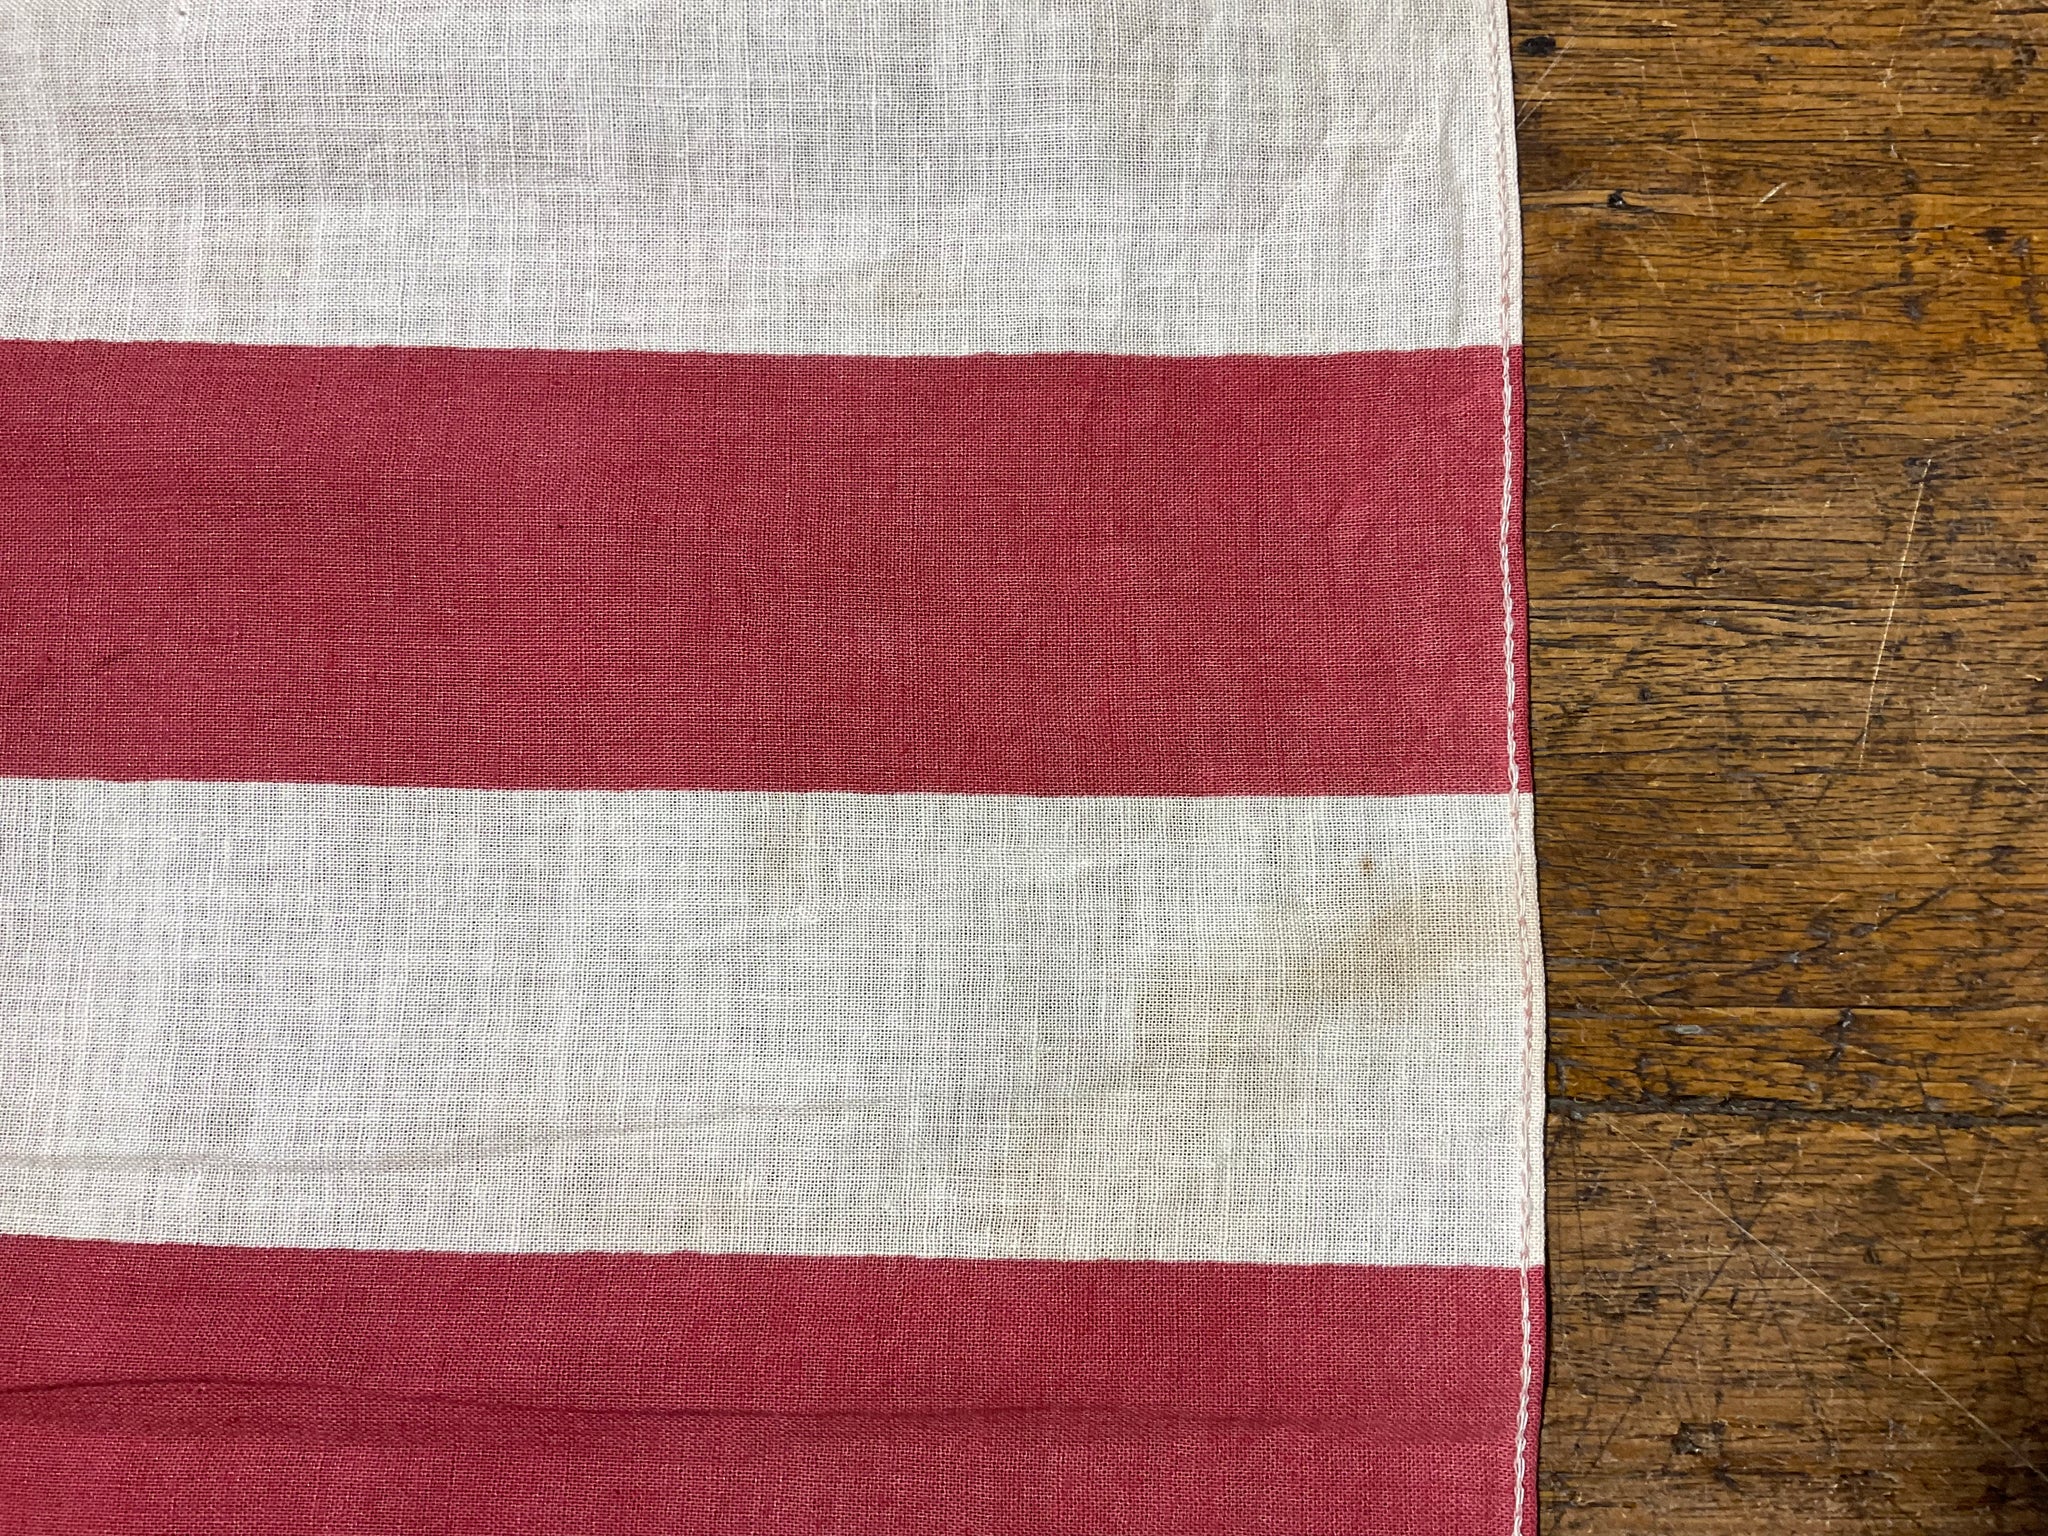 USA Vintage 1970’s United States America Printed Cotton Flag Authentic